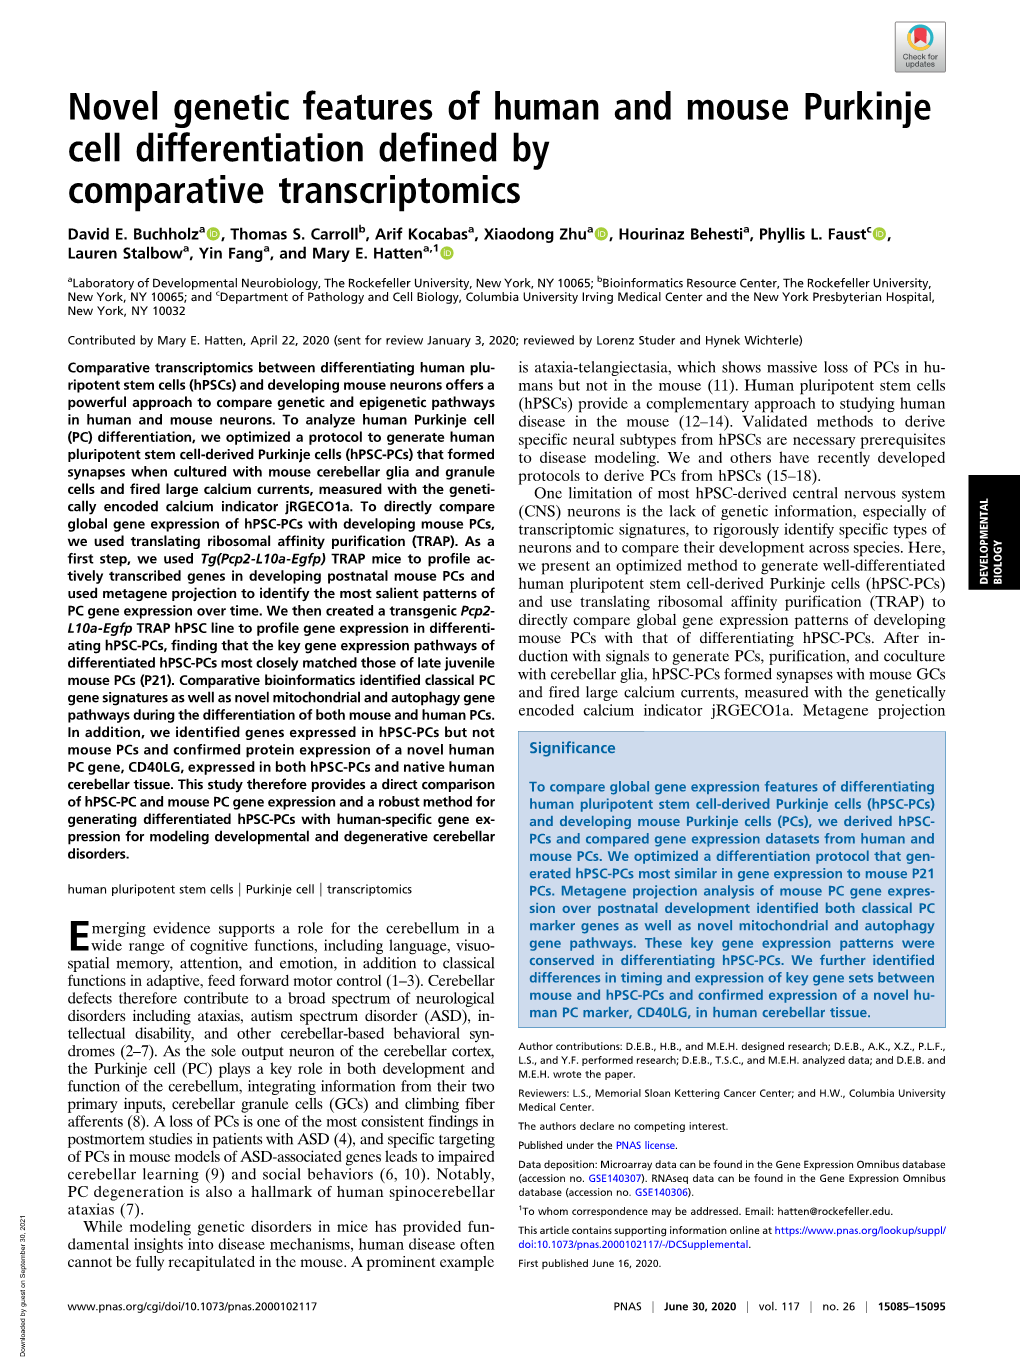 Novel Genetic Features of Human and Mouse Purkinje Cell Differentiation Defined by Comparative Transcriptomics